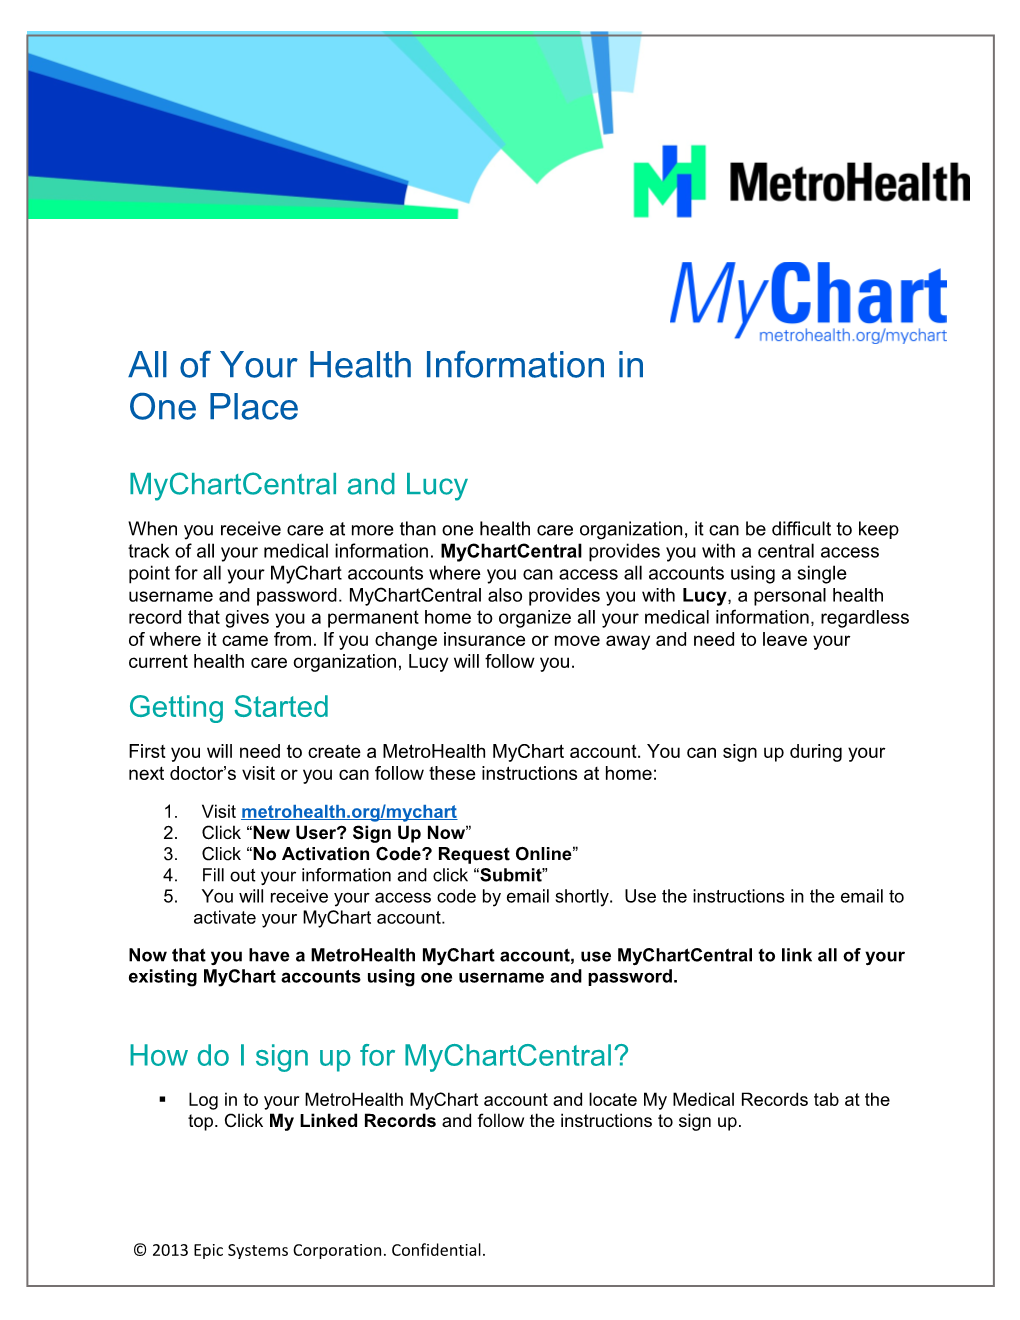 All of Your Health Information in One Place